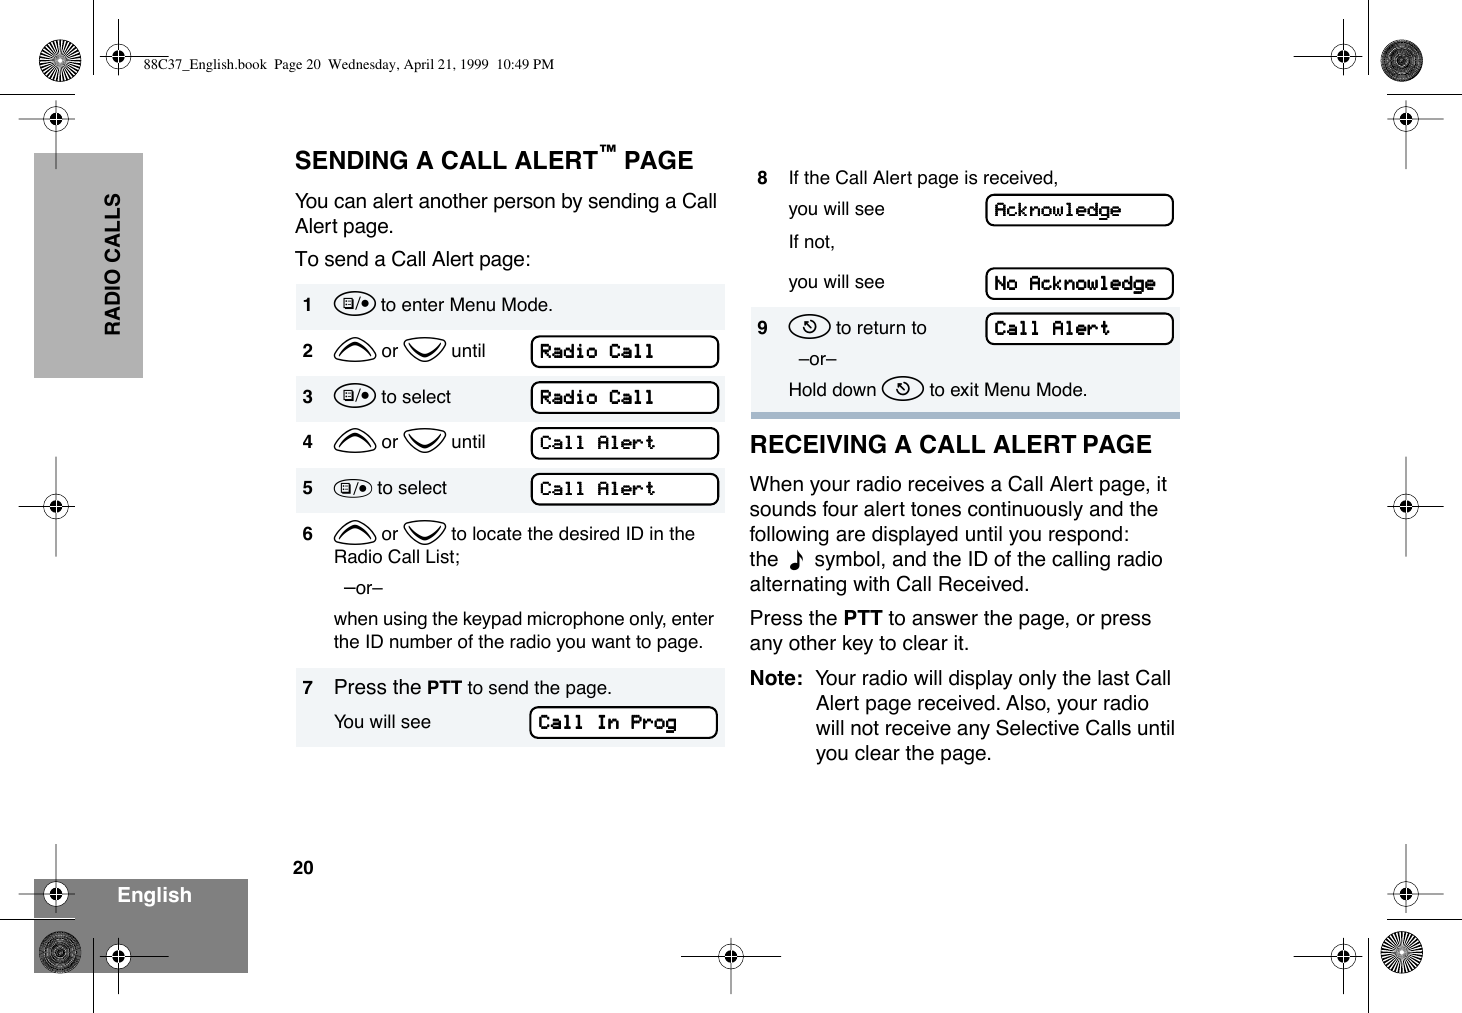 20EnglishRADIO CALLSSENDING A CALL ALERTª PAGEYou can alert another person by sending a Call Alert page.To send a Call Alert page:RECEIVING A CALL ALERT PAGEWhen your radio receives a Call Alert page, it sounds four alert tones continuously and the following are displayed until you respond: the  F  symbol, and the ID of the calling radio alternating with Call Received.Press the PTT to answer the page, or press any other key to clear it.Note: Your radio will display only the last Call Alert page received. Also, your radio will not receive any Selective Calls until you clear the page.1u to enter Menu Mode.2y or z until3u to select4y or z until5) to select6y or z to locate the desired ID in the Radio Call List;  ÐorÐwhen using the keypad microphone only, enter the ID number of the radio you want to page.7Press the PTT to send the page.You will seeRRRRaaaaddddiiiioooo    CCCCaaaallllllllRRRRaaaaddddiiiioooo    CCCCaaaallllllllCCCCaaaallllllll    AAAAlllleeeerrrrttttCCCCaaaallllllll    AAAAlllleeeerrrrttttCCCCaaaallllllll    IIIInnnn    PPPPrrrroooogggg8If the Call Alert page is received, you will seeIf not,you will see9t to return to  ÐorÐHold down t to exit Menu Mode.AAAAcccckkkknnnnoooowwwwlllleeeeddddggggeeeeNNNNoooo    AAAAcccckkkknnnnoooowwwwlllleeeeddddggggeeeeCCCCaaaallllllll    AAAAlllleeeerrrrtttt88C37_English.book  Page 20  Wednesday, April 21, 1999  10:49 PM